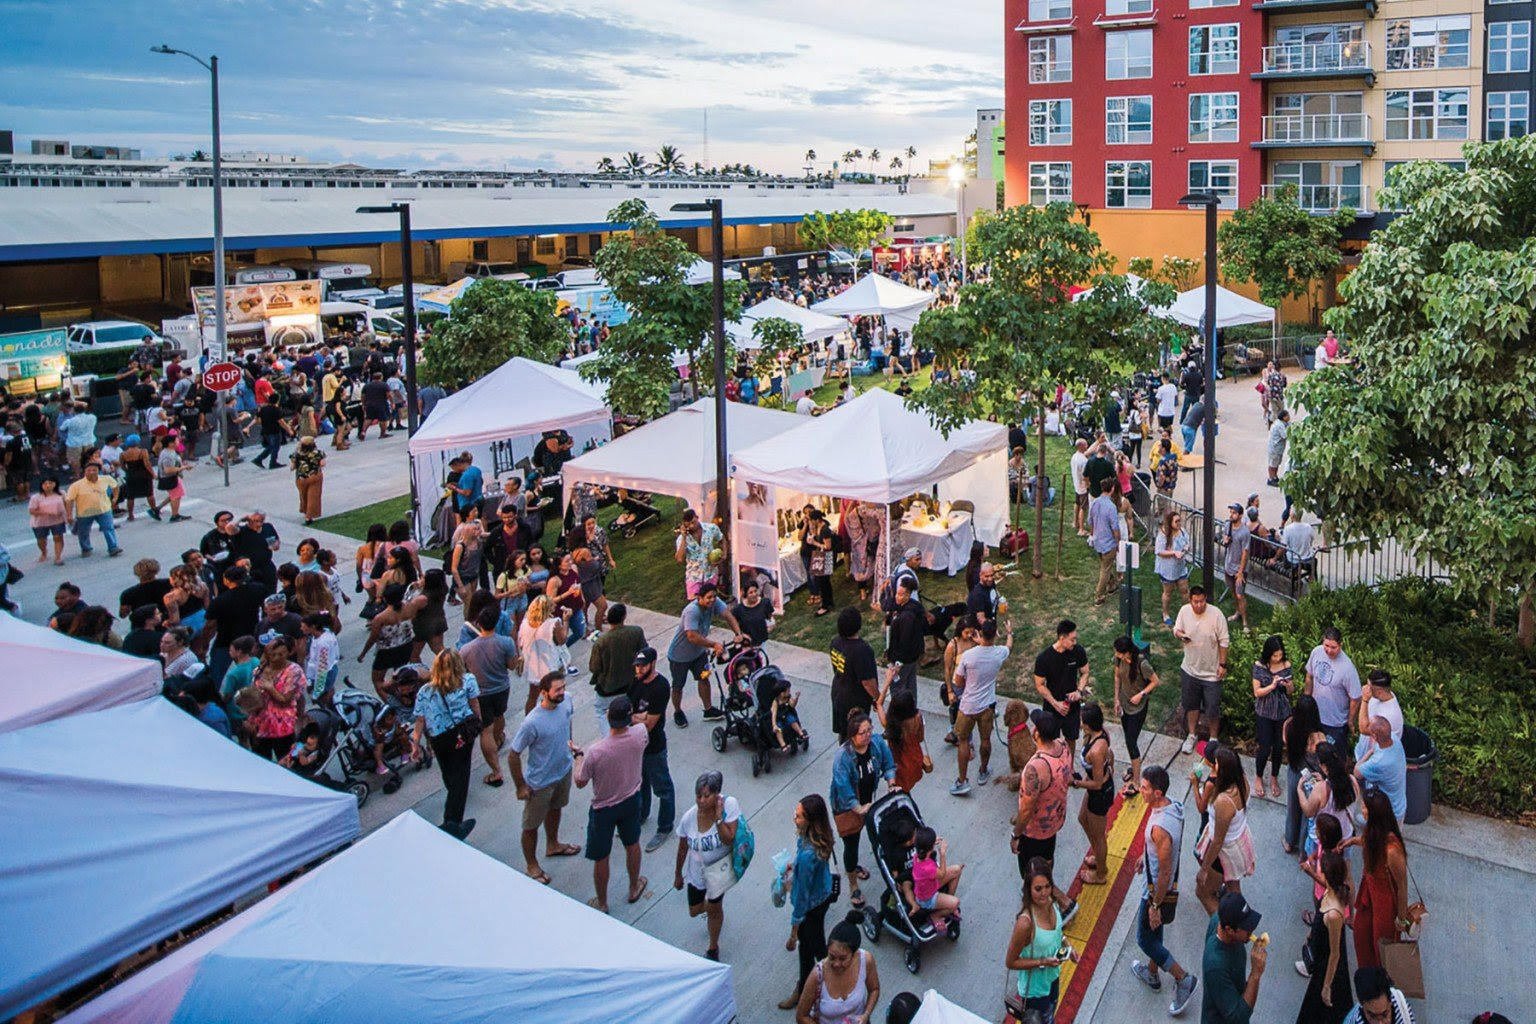 Honolulu Night Market brings people from across O‘ahu for great food and entertainment, supporting our local businesses and the economy. | Photo: courtesy of Kamehameha Schools